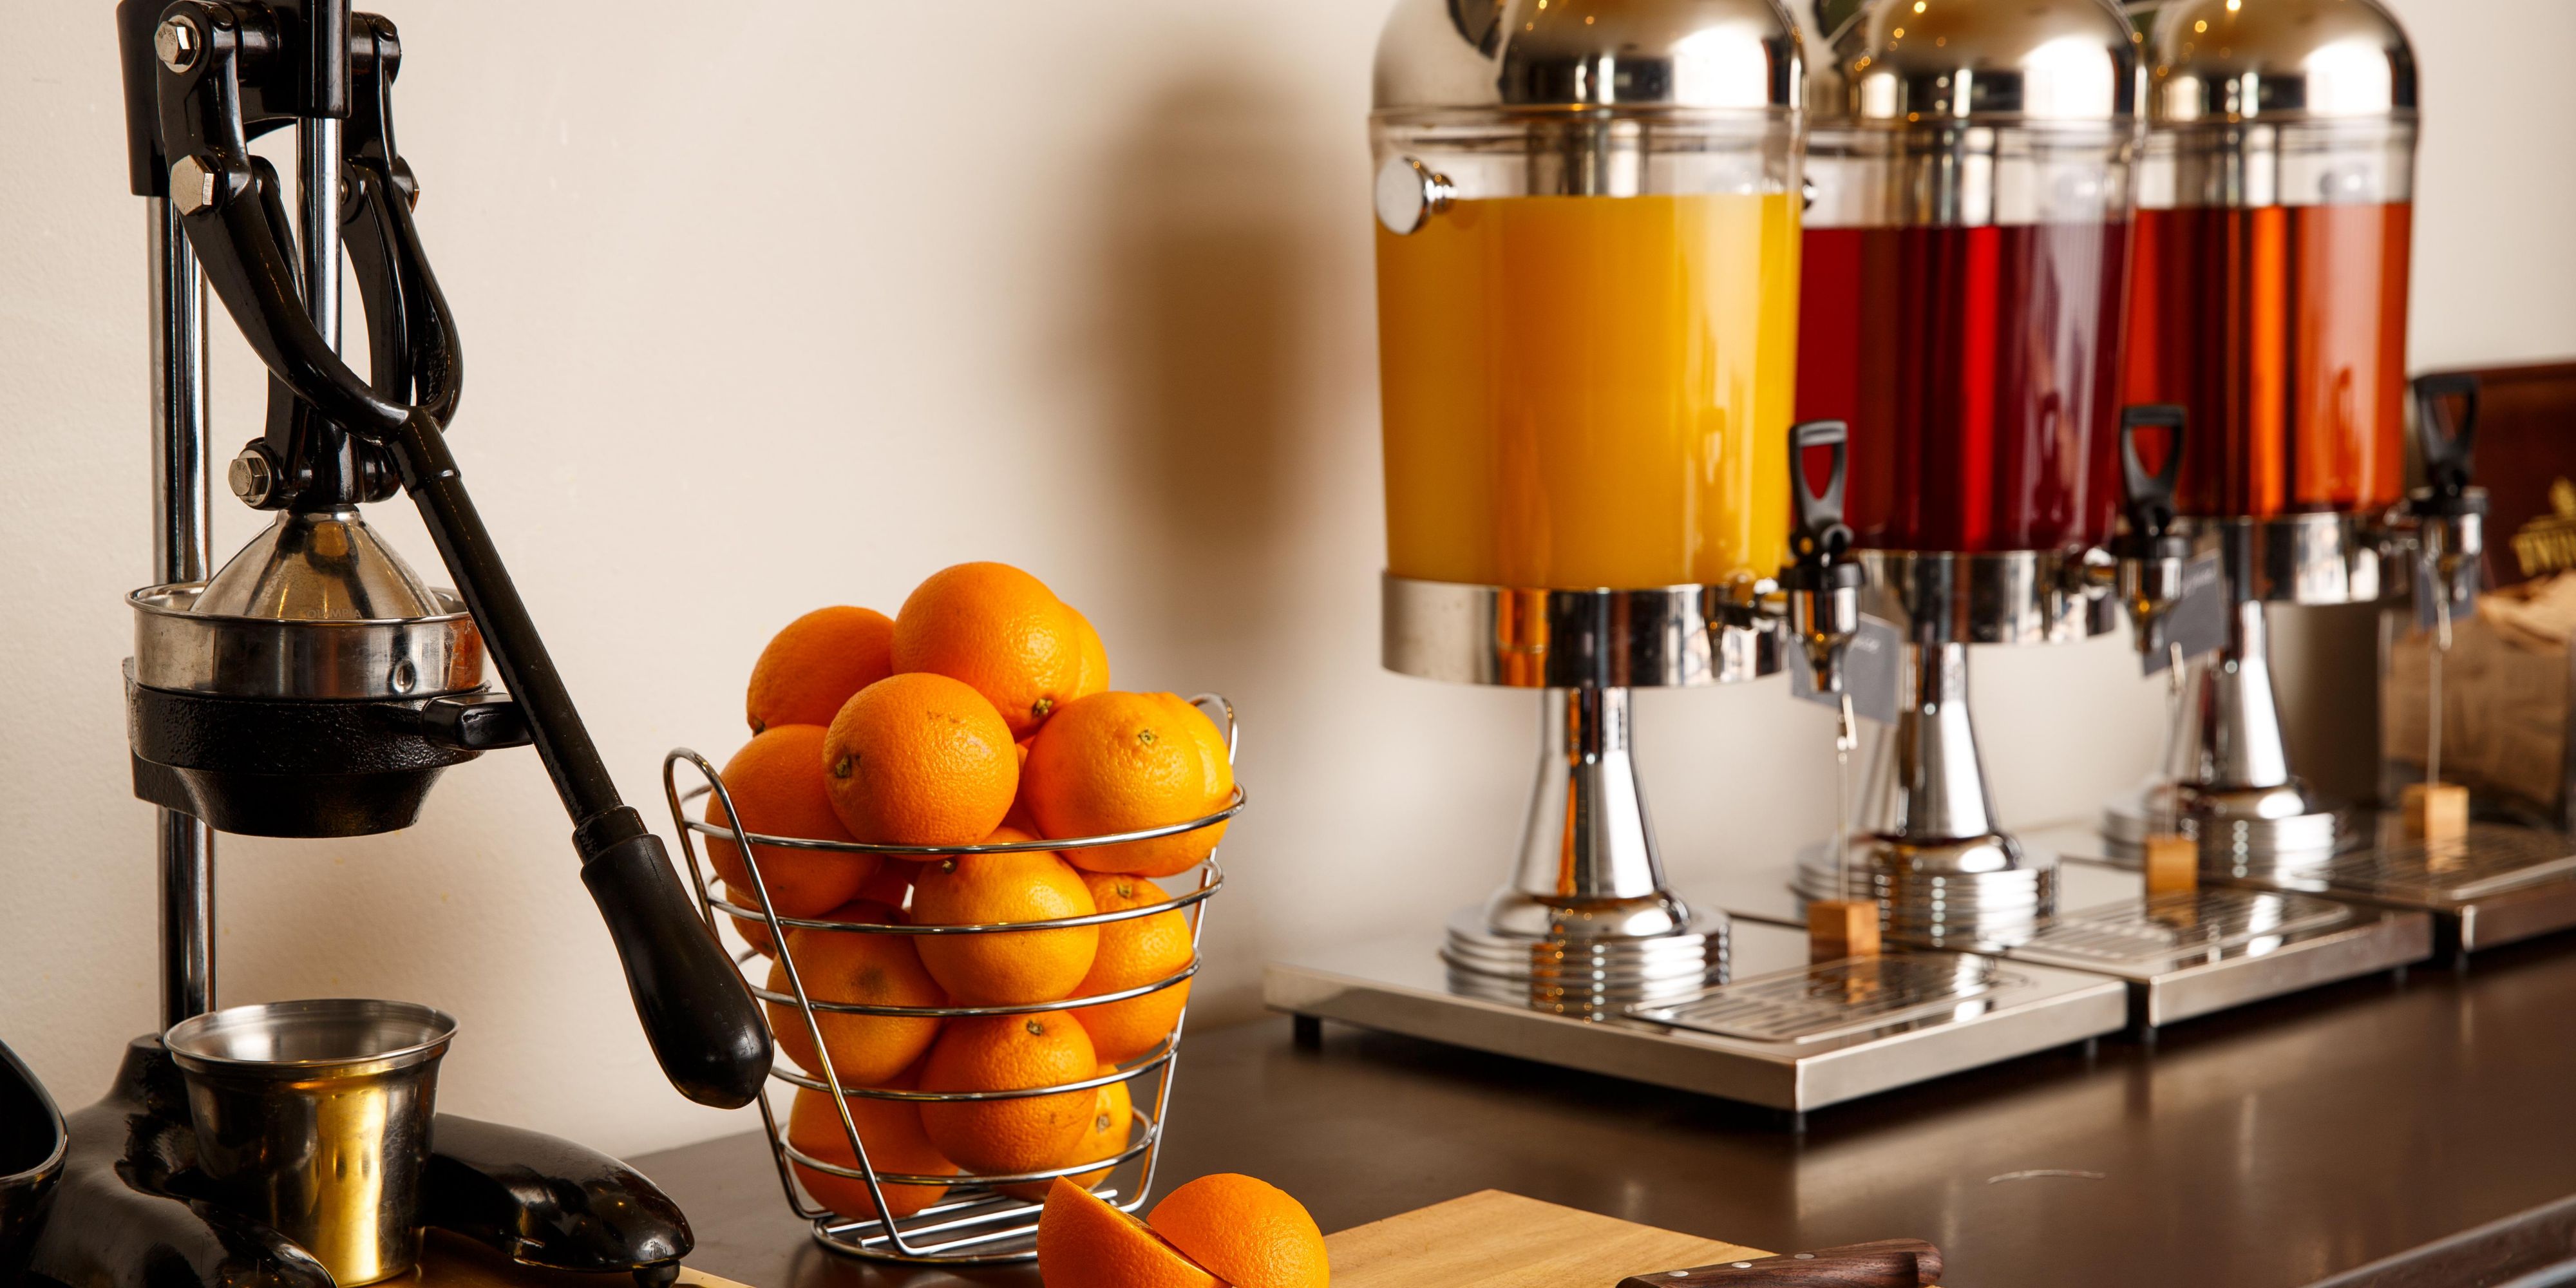 Juices and freshly squeezed oranges to boost up with Vitamins